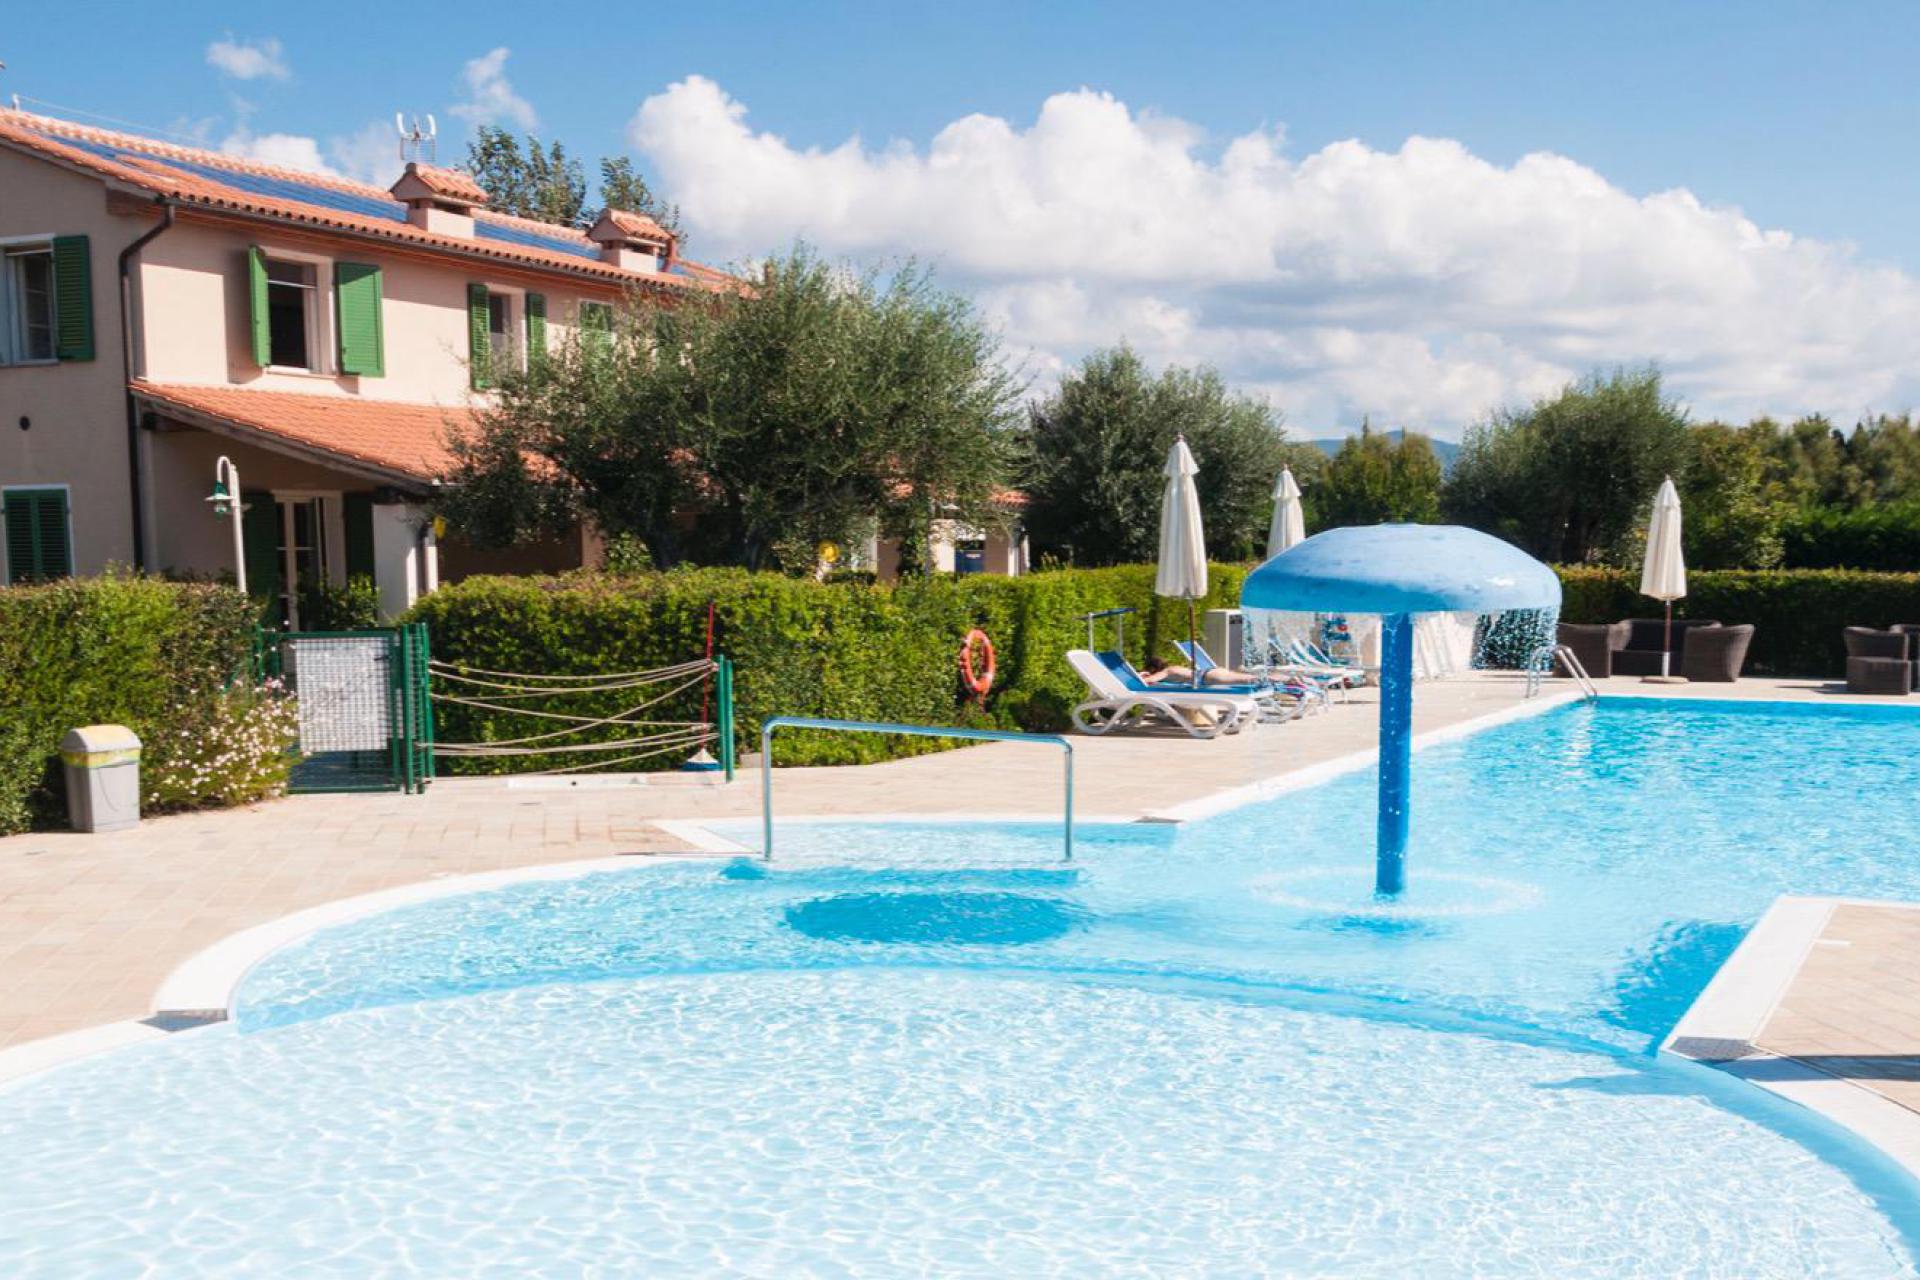 3. Nice agriturismo within walking distance of the sea